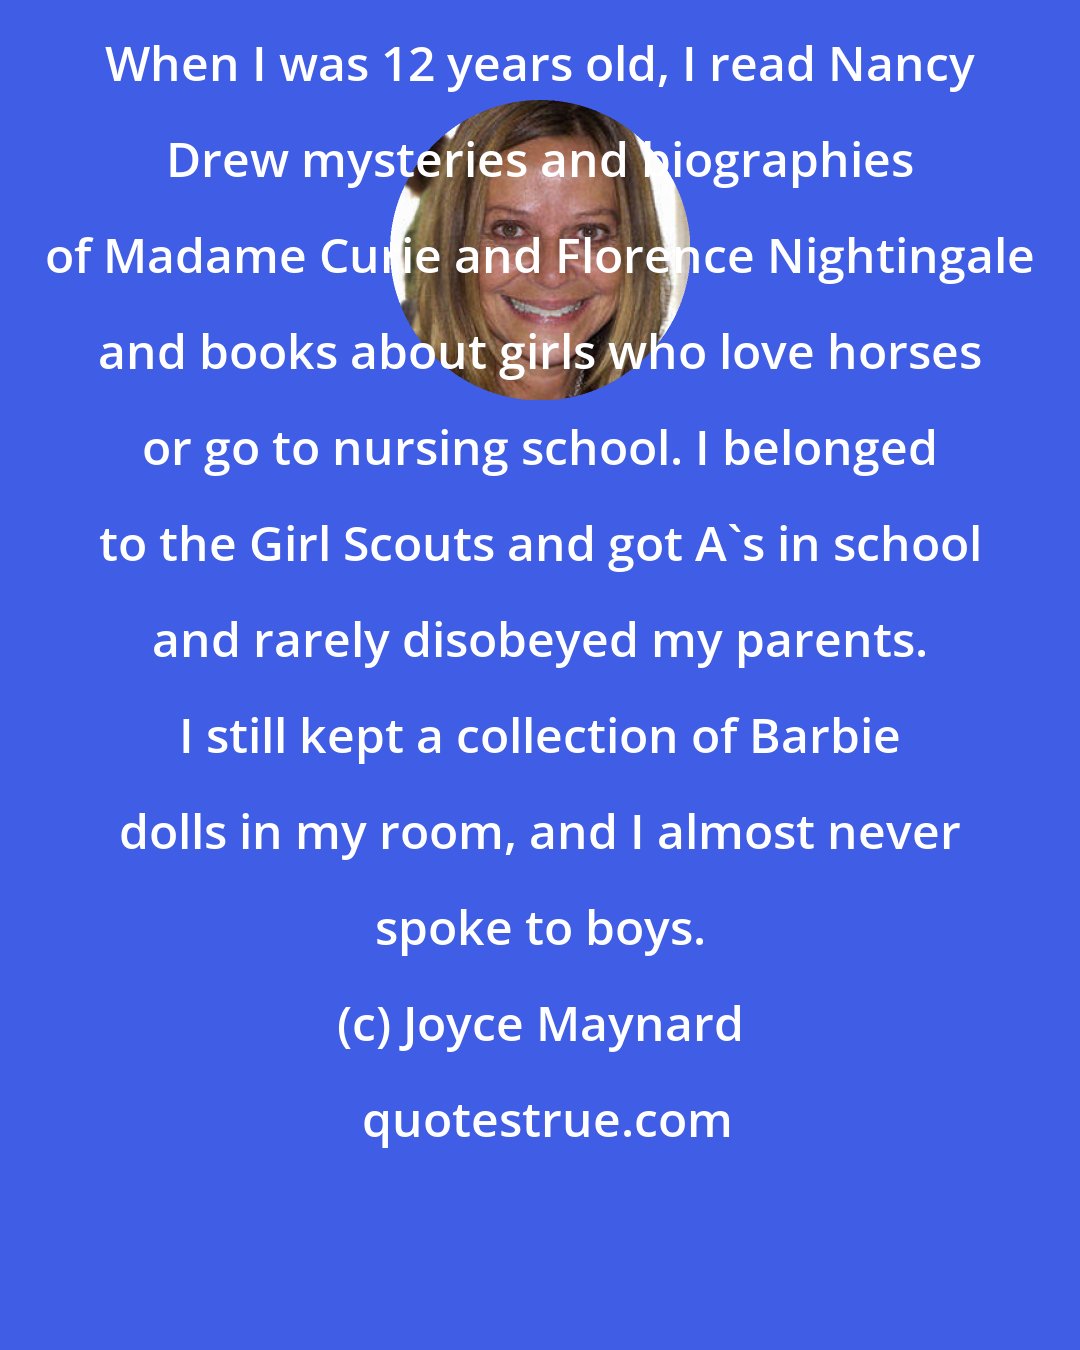 Joyce Maynard: When I was 12 years old, I read Nancy Drew mysteries and biographies of Madame Curie and Florence Nightingale and books about girls who love horses or go to nursing school. I belonged to the Girl Scouts and got A's in school and rarely disobeyed my parents. I still kept a collection of Barbie dolls in my room, and I almost never spoke to boys.